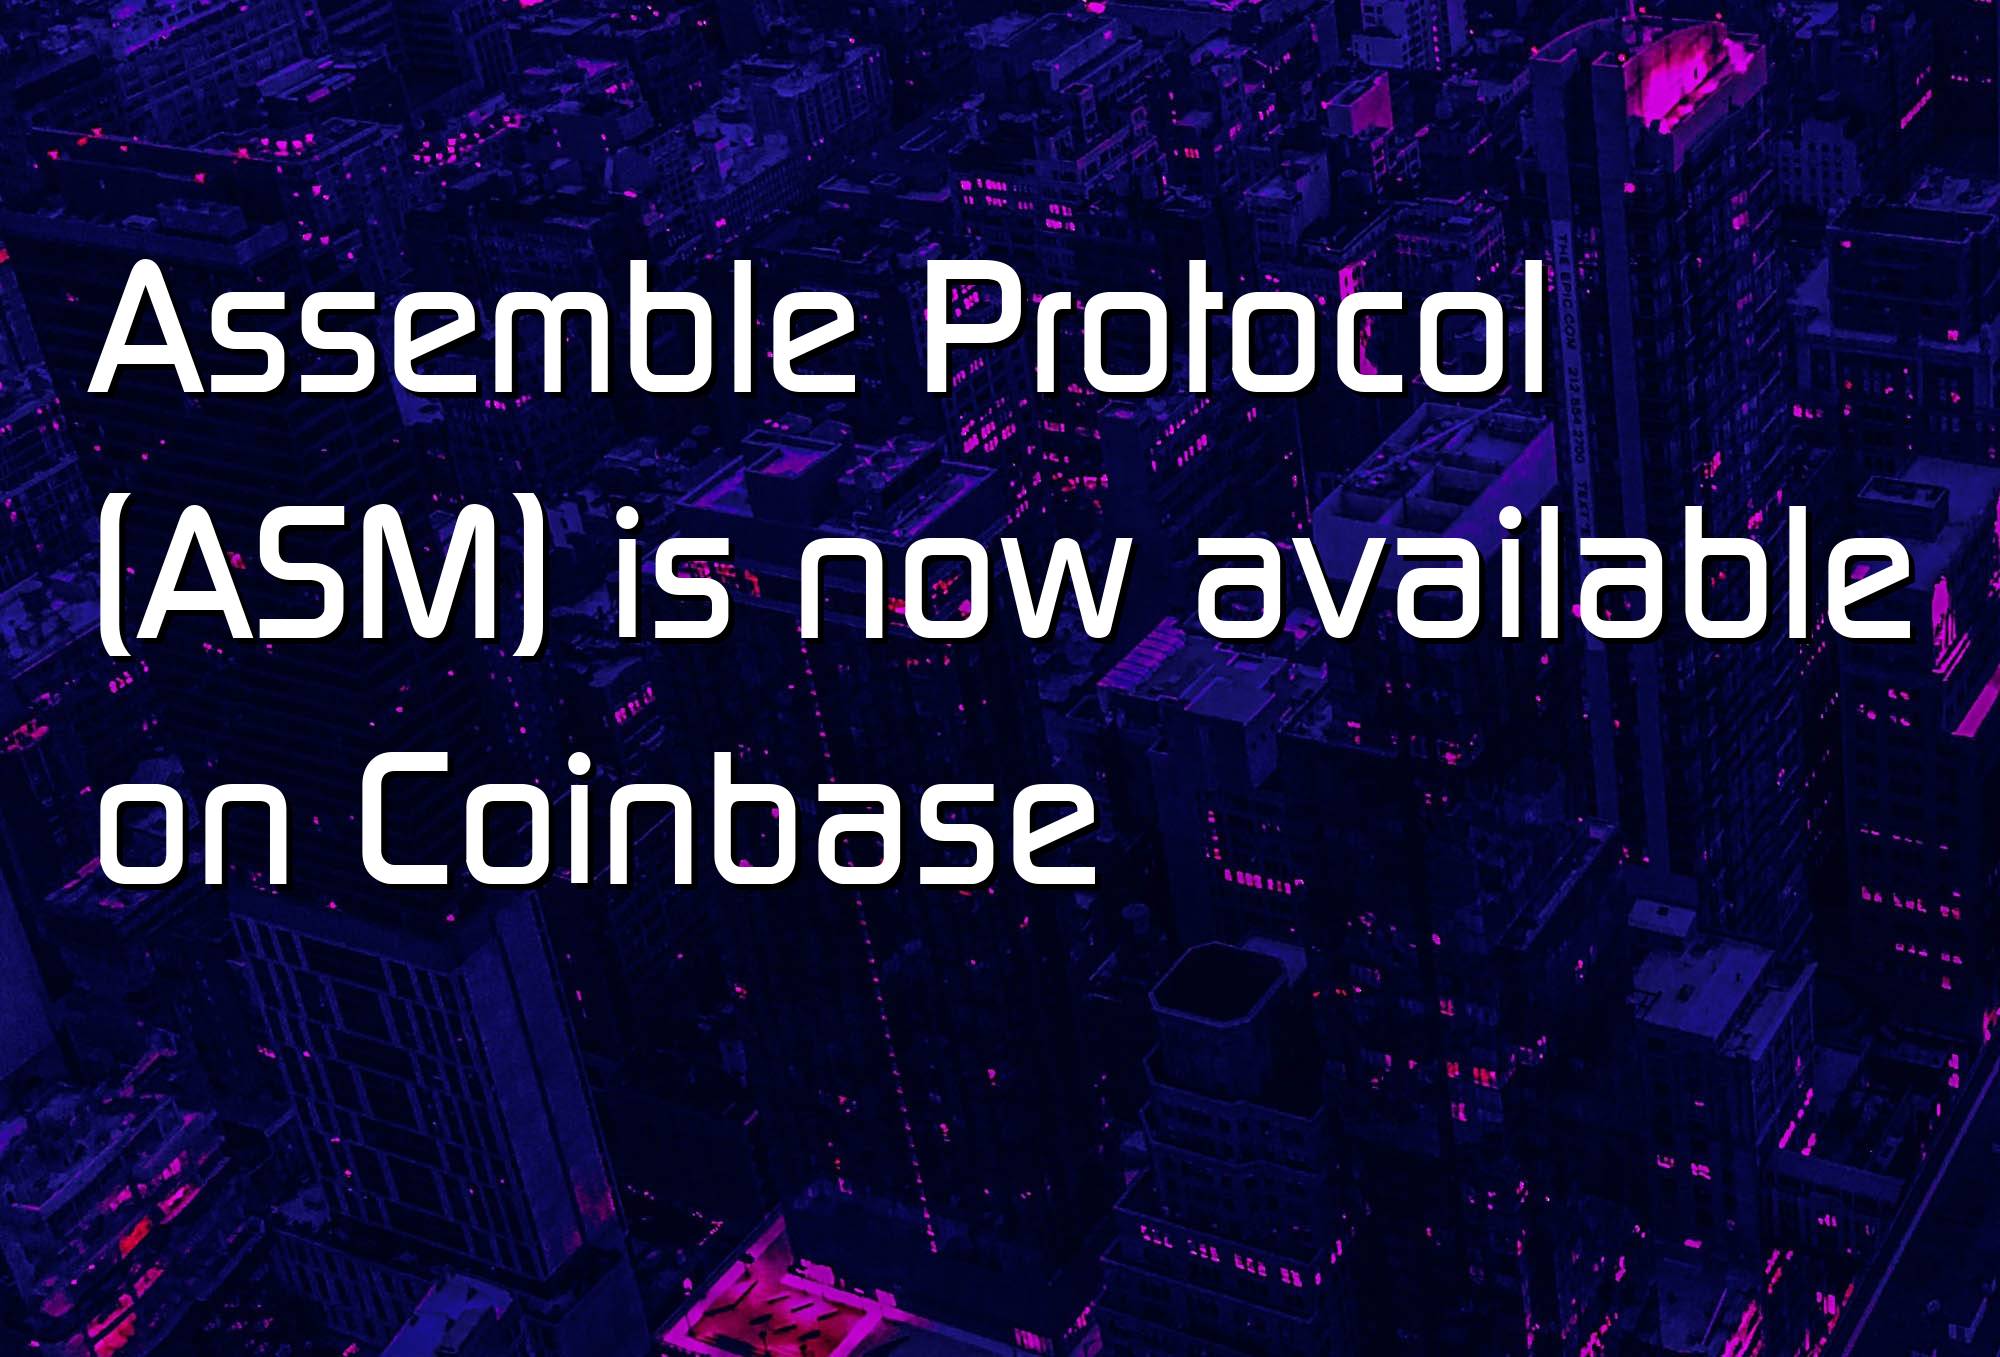 @$62856.99 Assemble Protocol (ASM) is now available on Coinbase